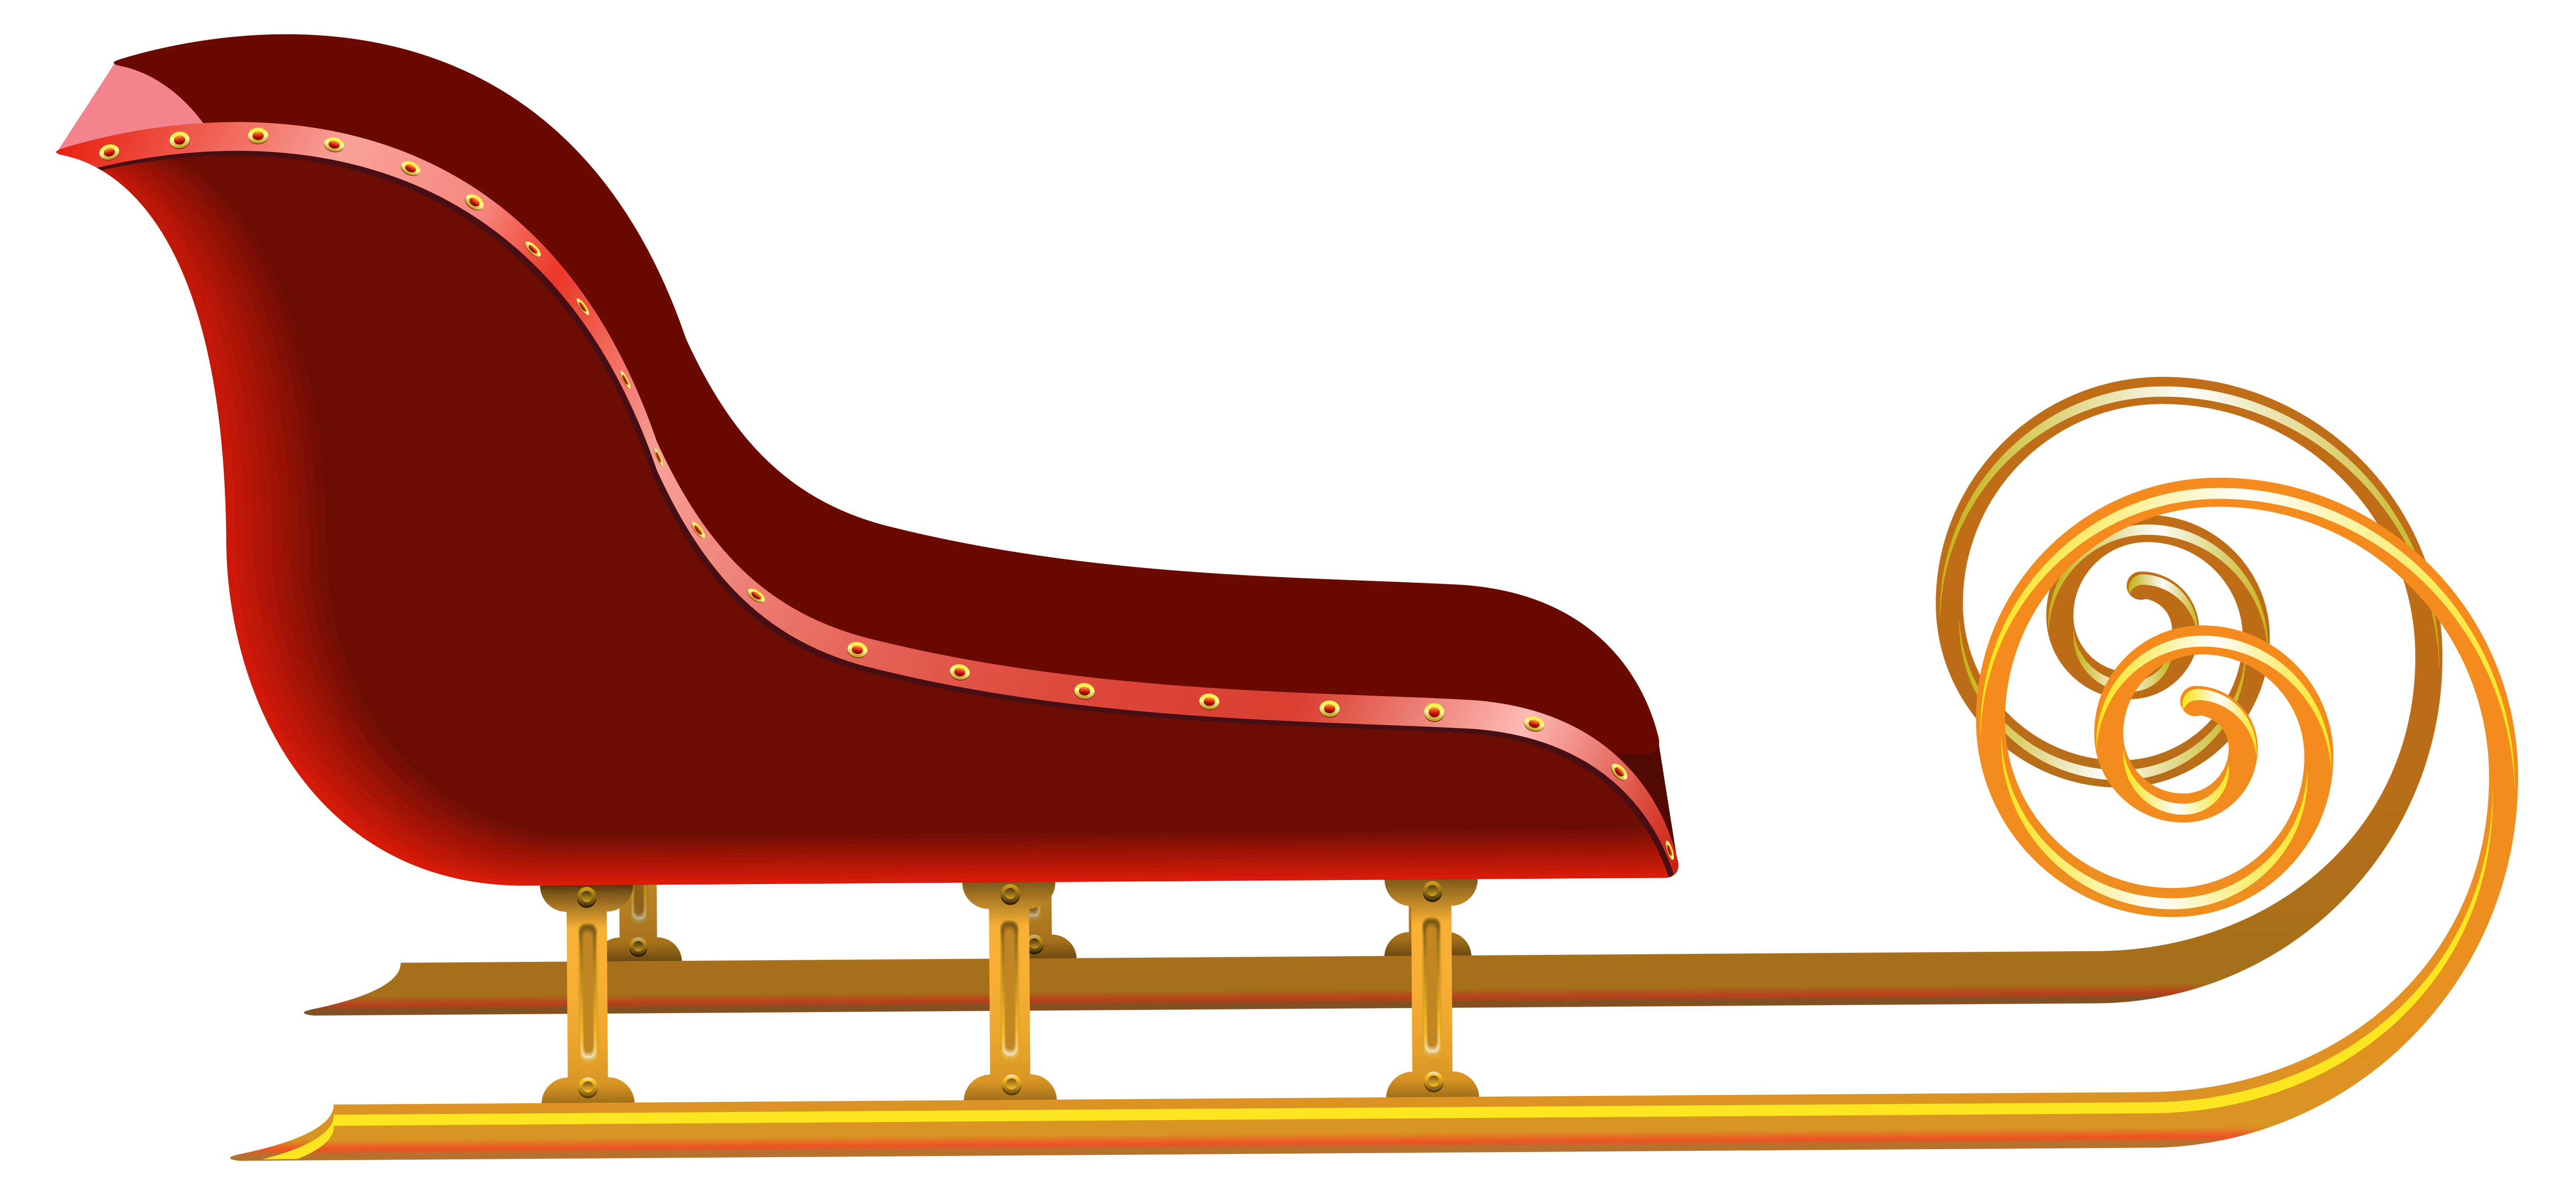 santa sleigh, clipart sleigh png and cliparts for download hddfhm #30496